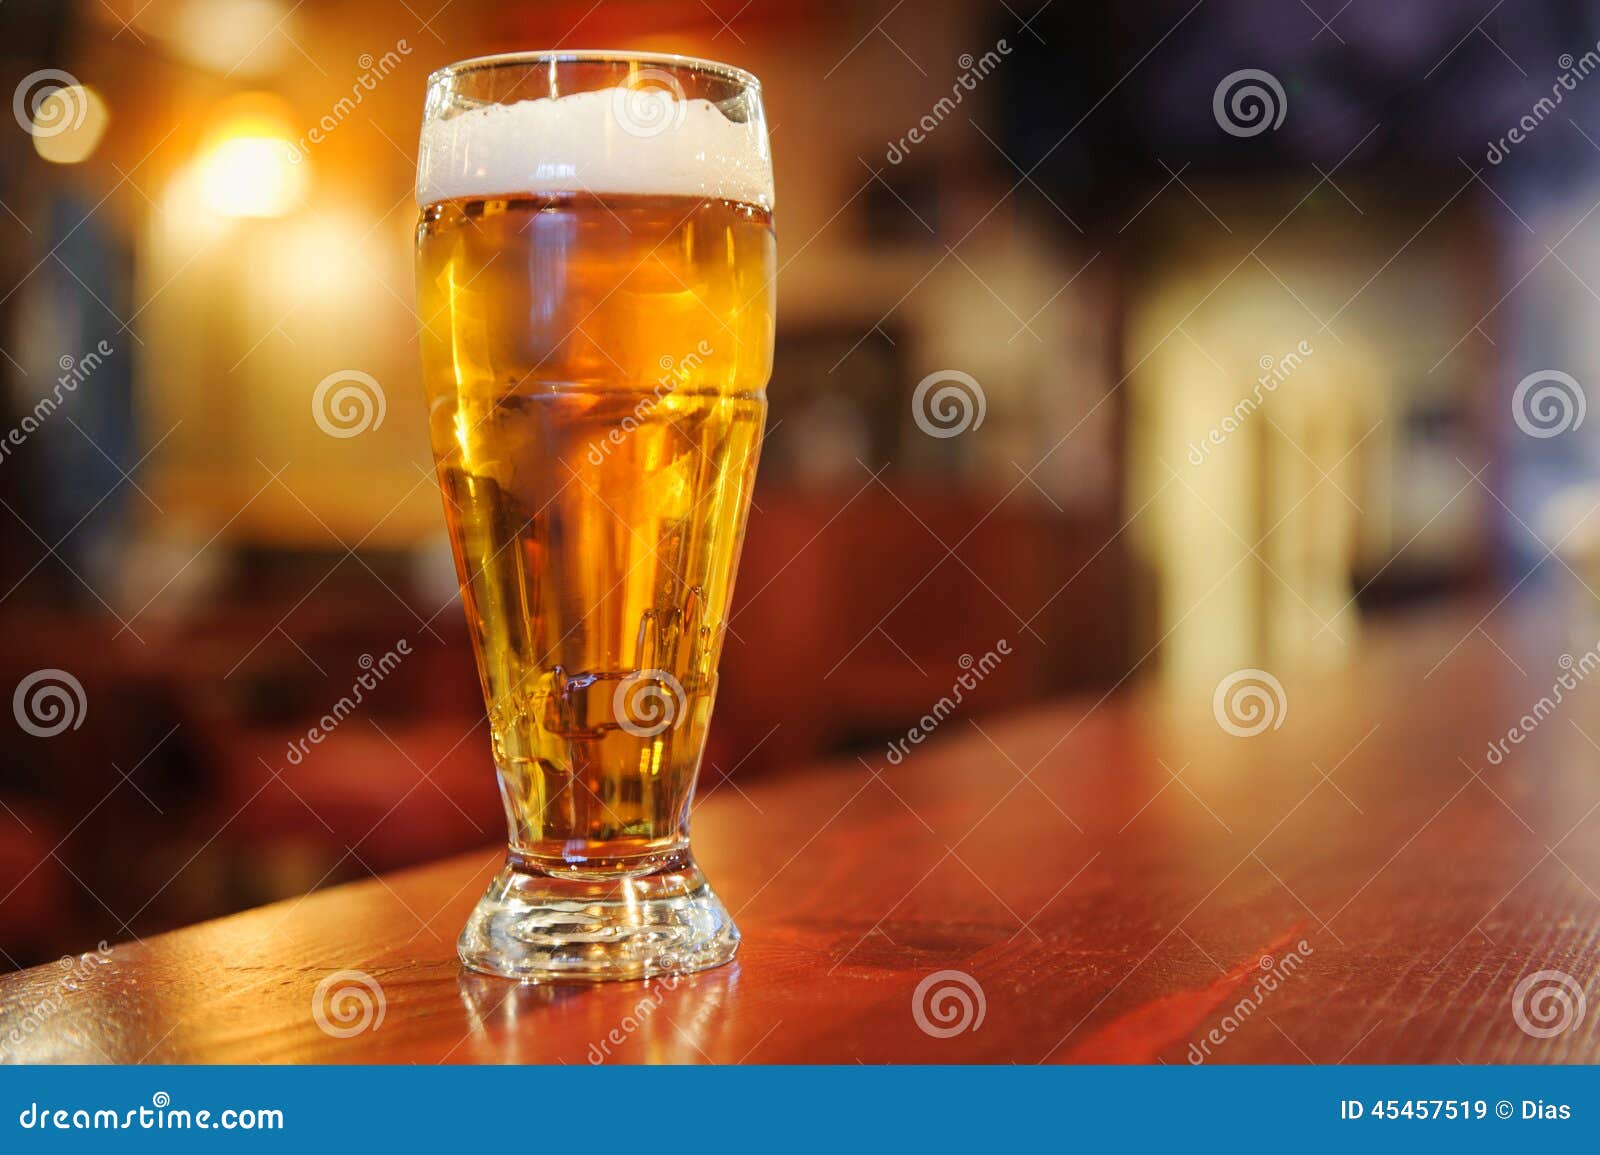 glass of beer on the bar